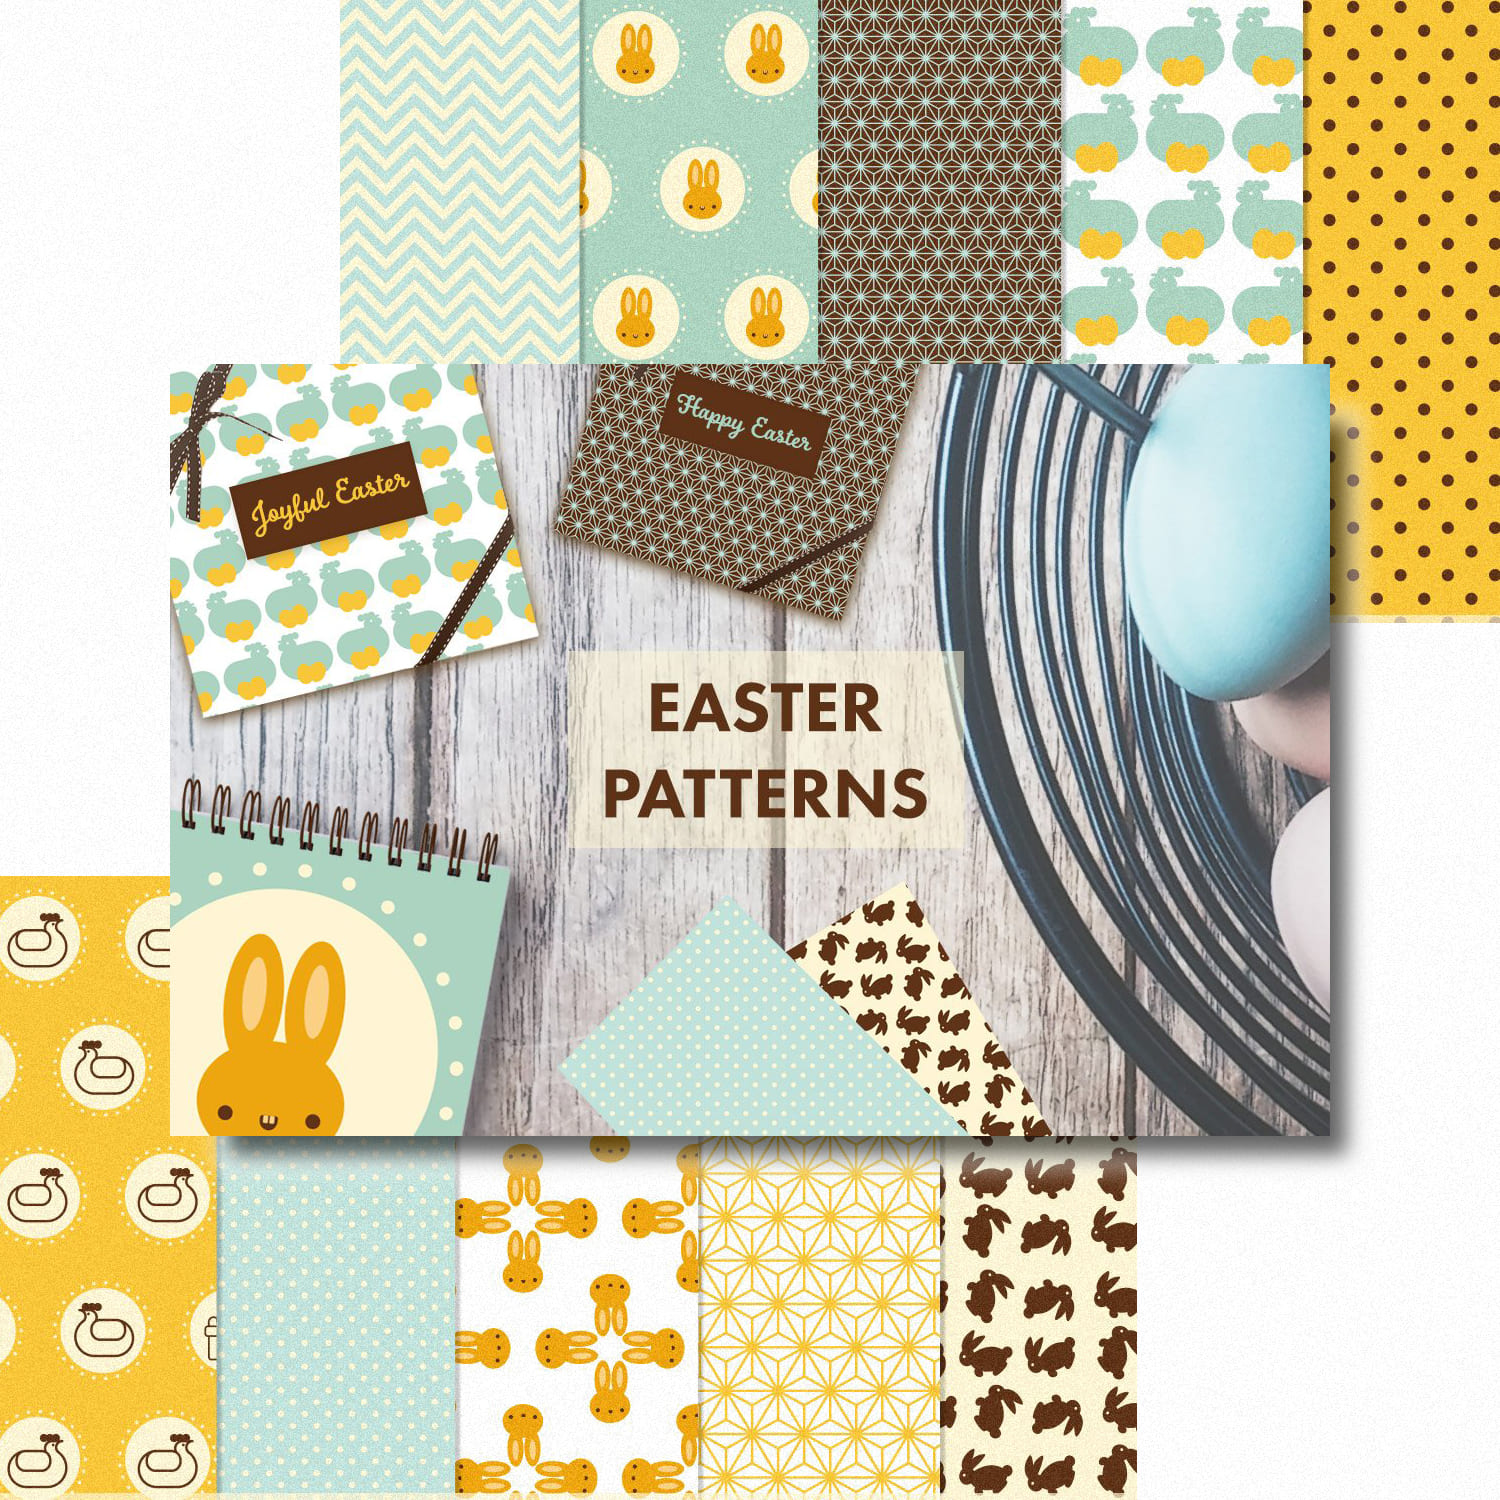 Easter Patterns cover.